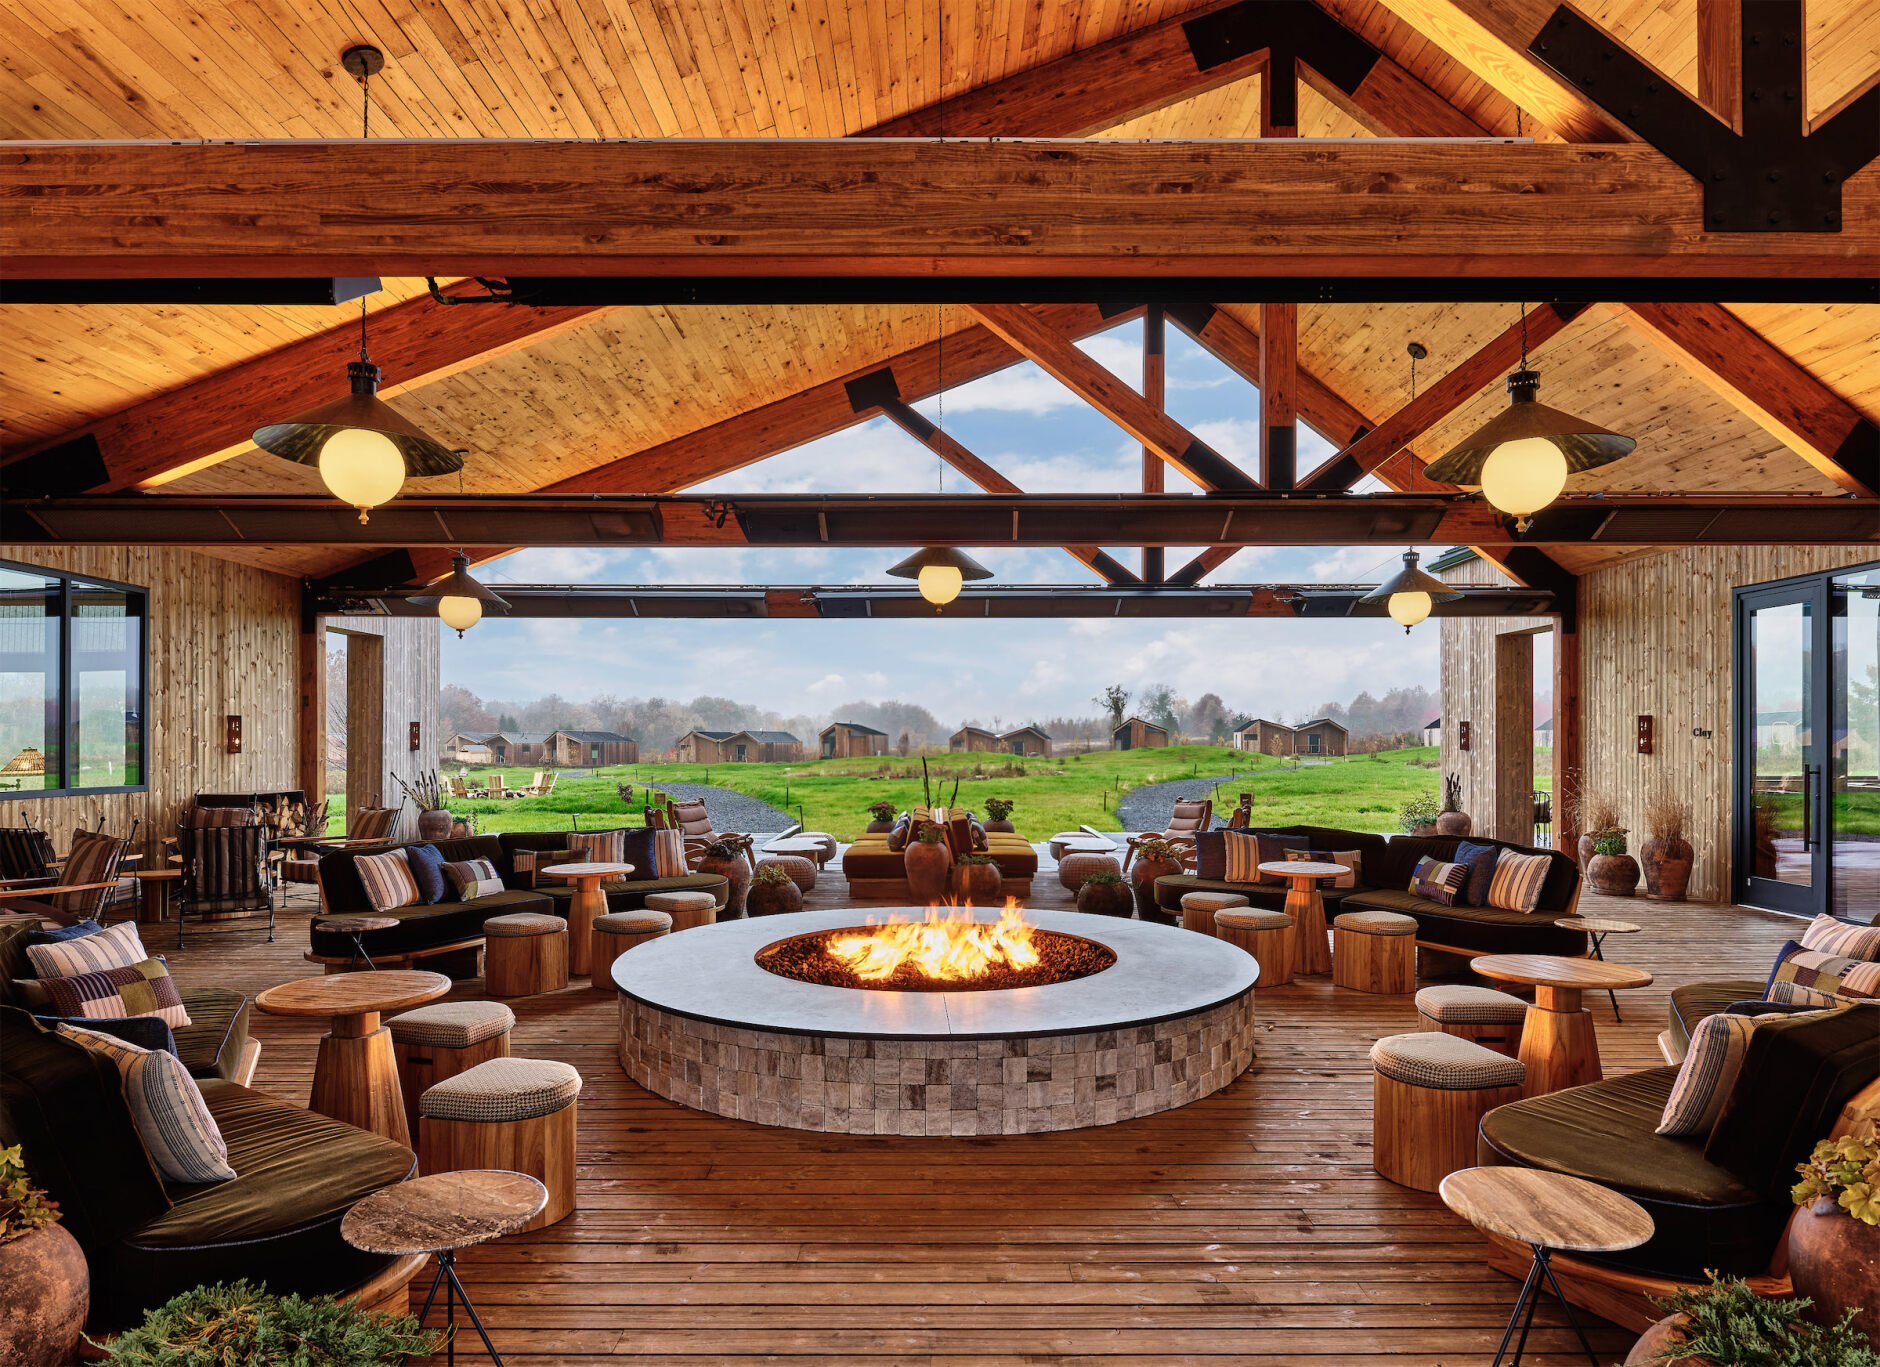 ROH New Hotel Openings: The Great Porch at Wildflower Farms